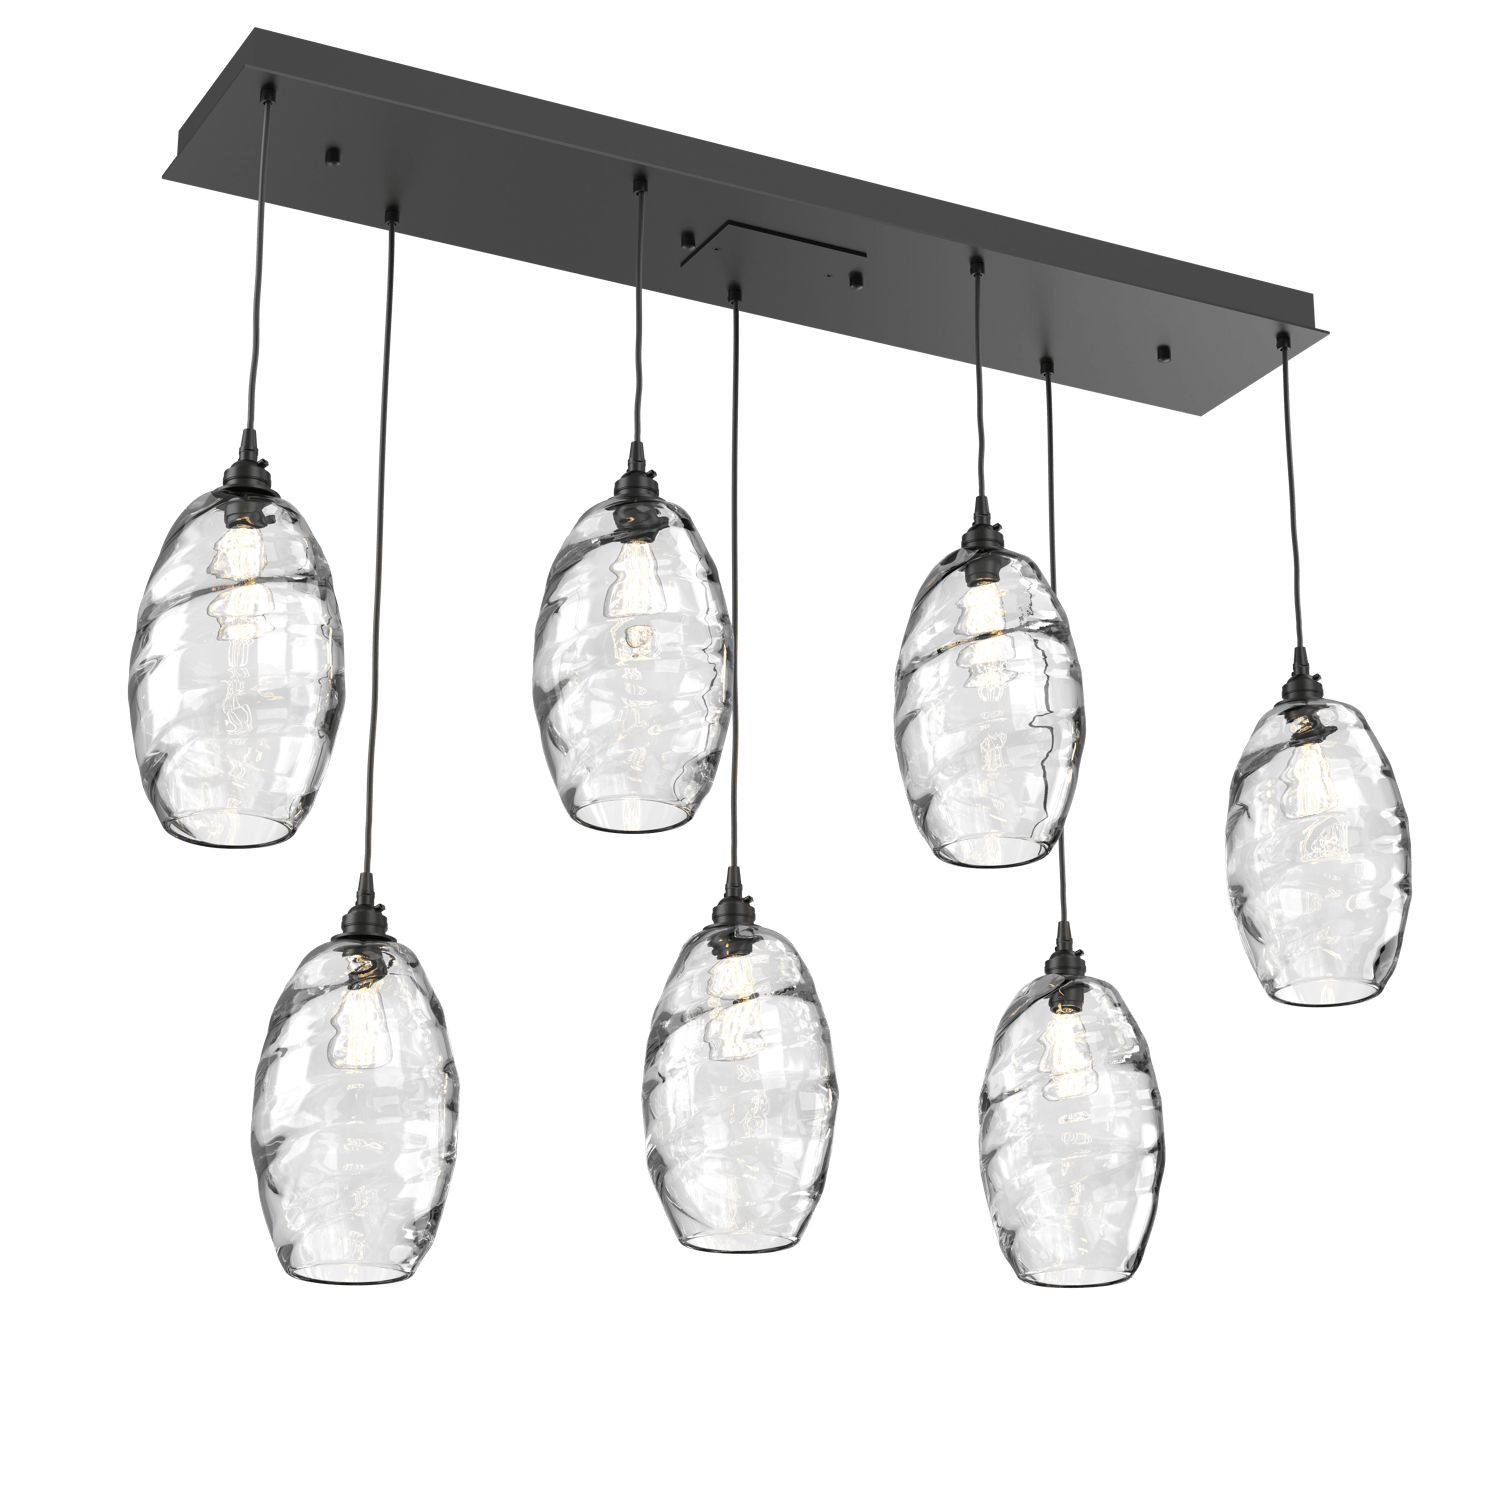 PLB0035-07-MB-OC-Hammerton-Studio-Optic-Blown-Glass-Elisse-7-light-linear-pendant-chandelier-with-matte-black-finish-and-optic-clear-blown-glass-shades-and-incandescent-lamping